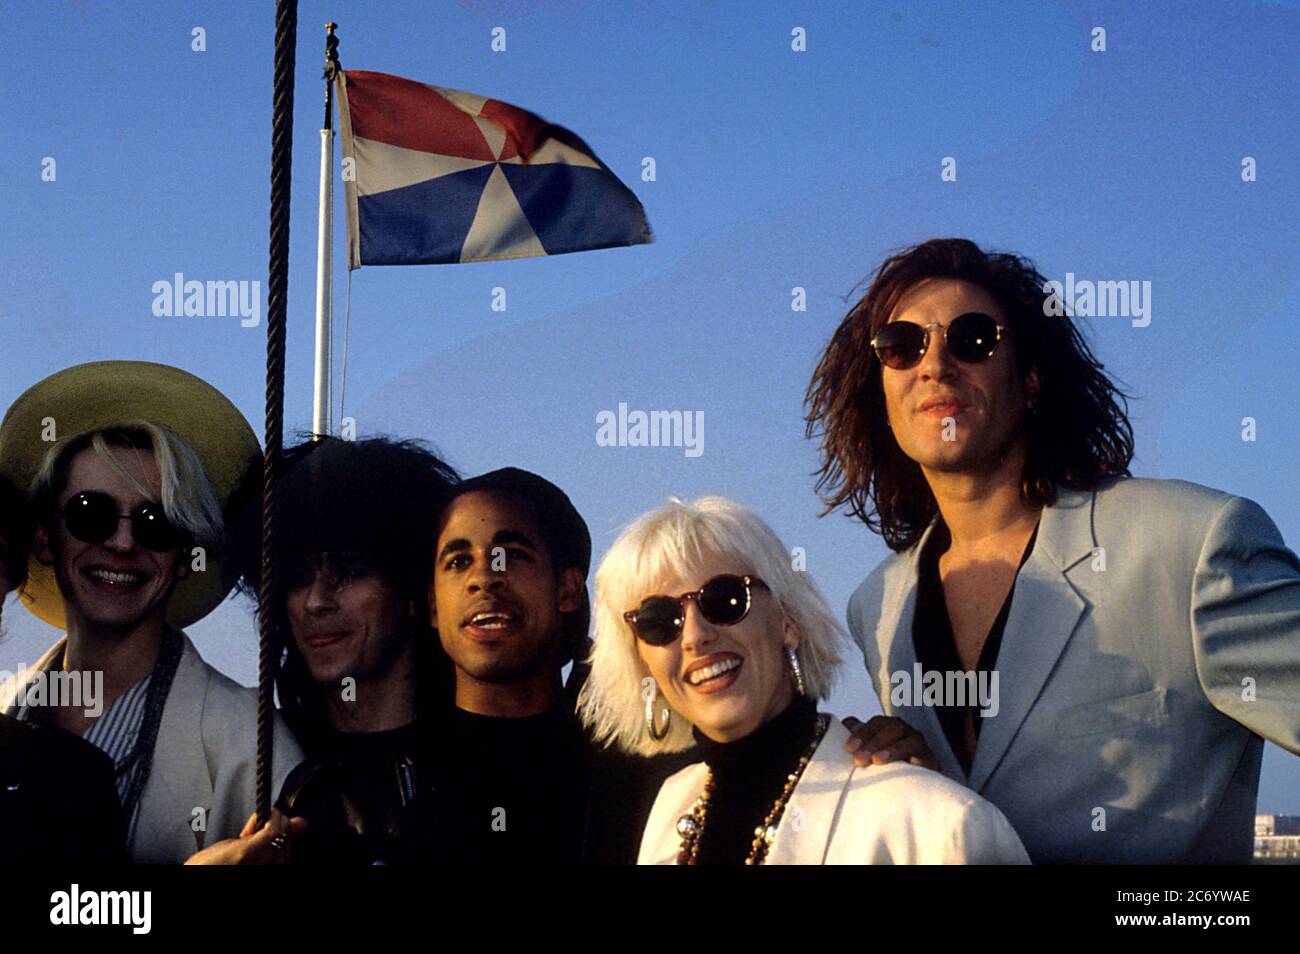 Nick Rhodes, Warren Cuccurullo, Sterling Campbell, Backgroundsangerin and Simon Le Bon from Duran Duran at the photocall for the 'Big Electric Theater' tour in Limeharbour on the Isle of Dogs. London, April 13, 1989 | usage worldwide Stock Photo